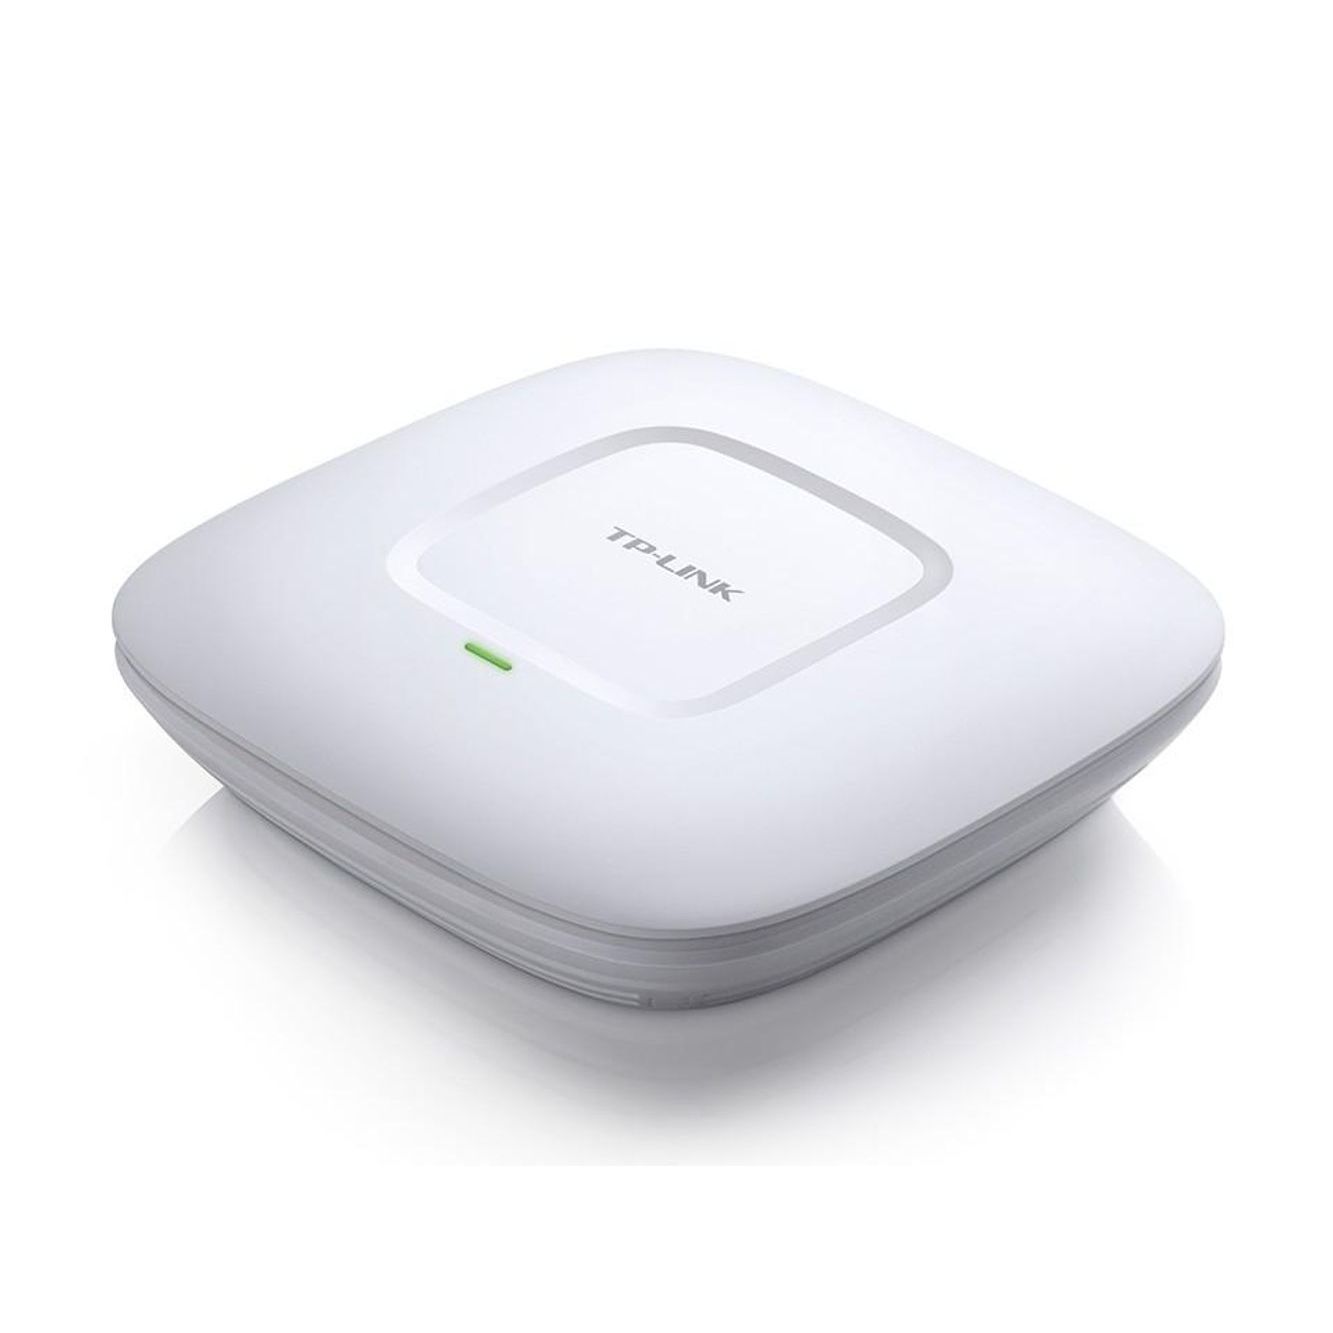 TL-EAP110 - TP-LINK EAP110 300Mbps Wireless N Ceiling Mount Access Point with Passive PoE